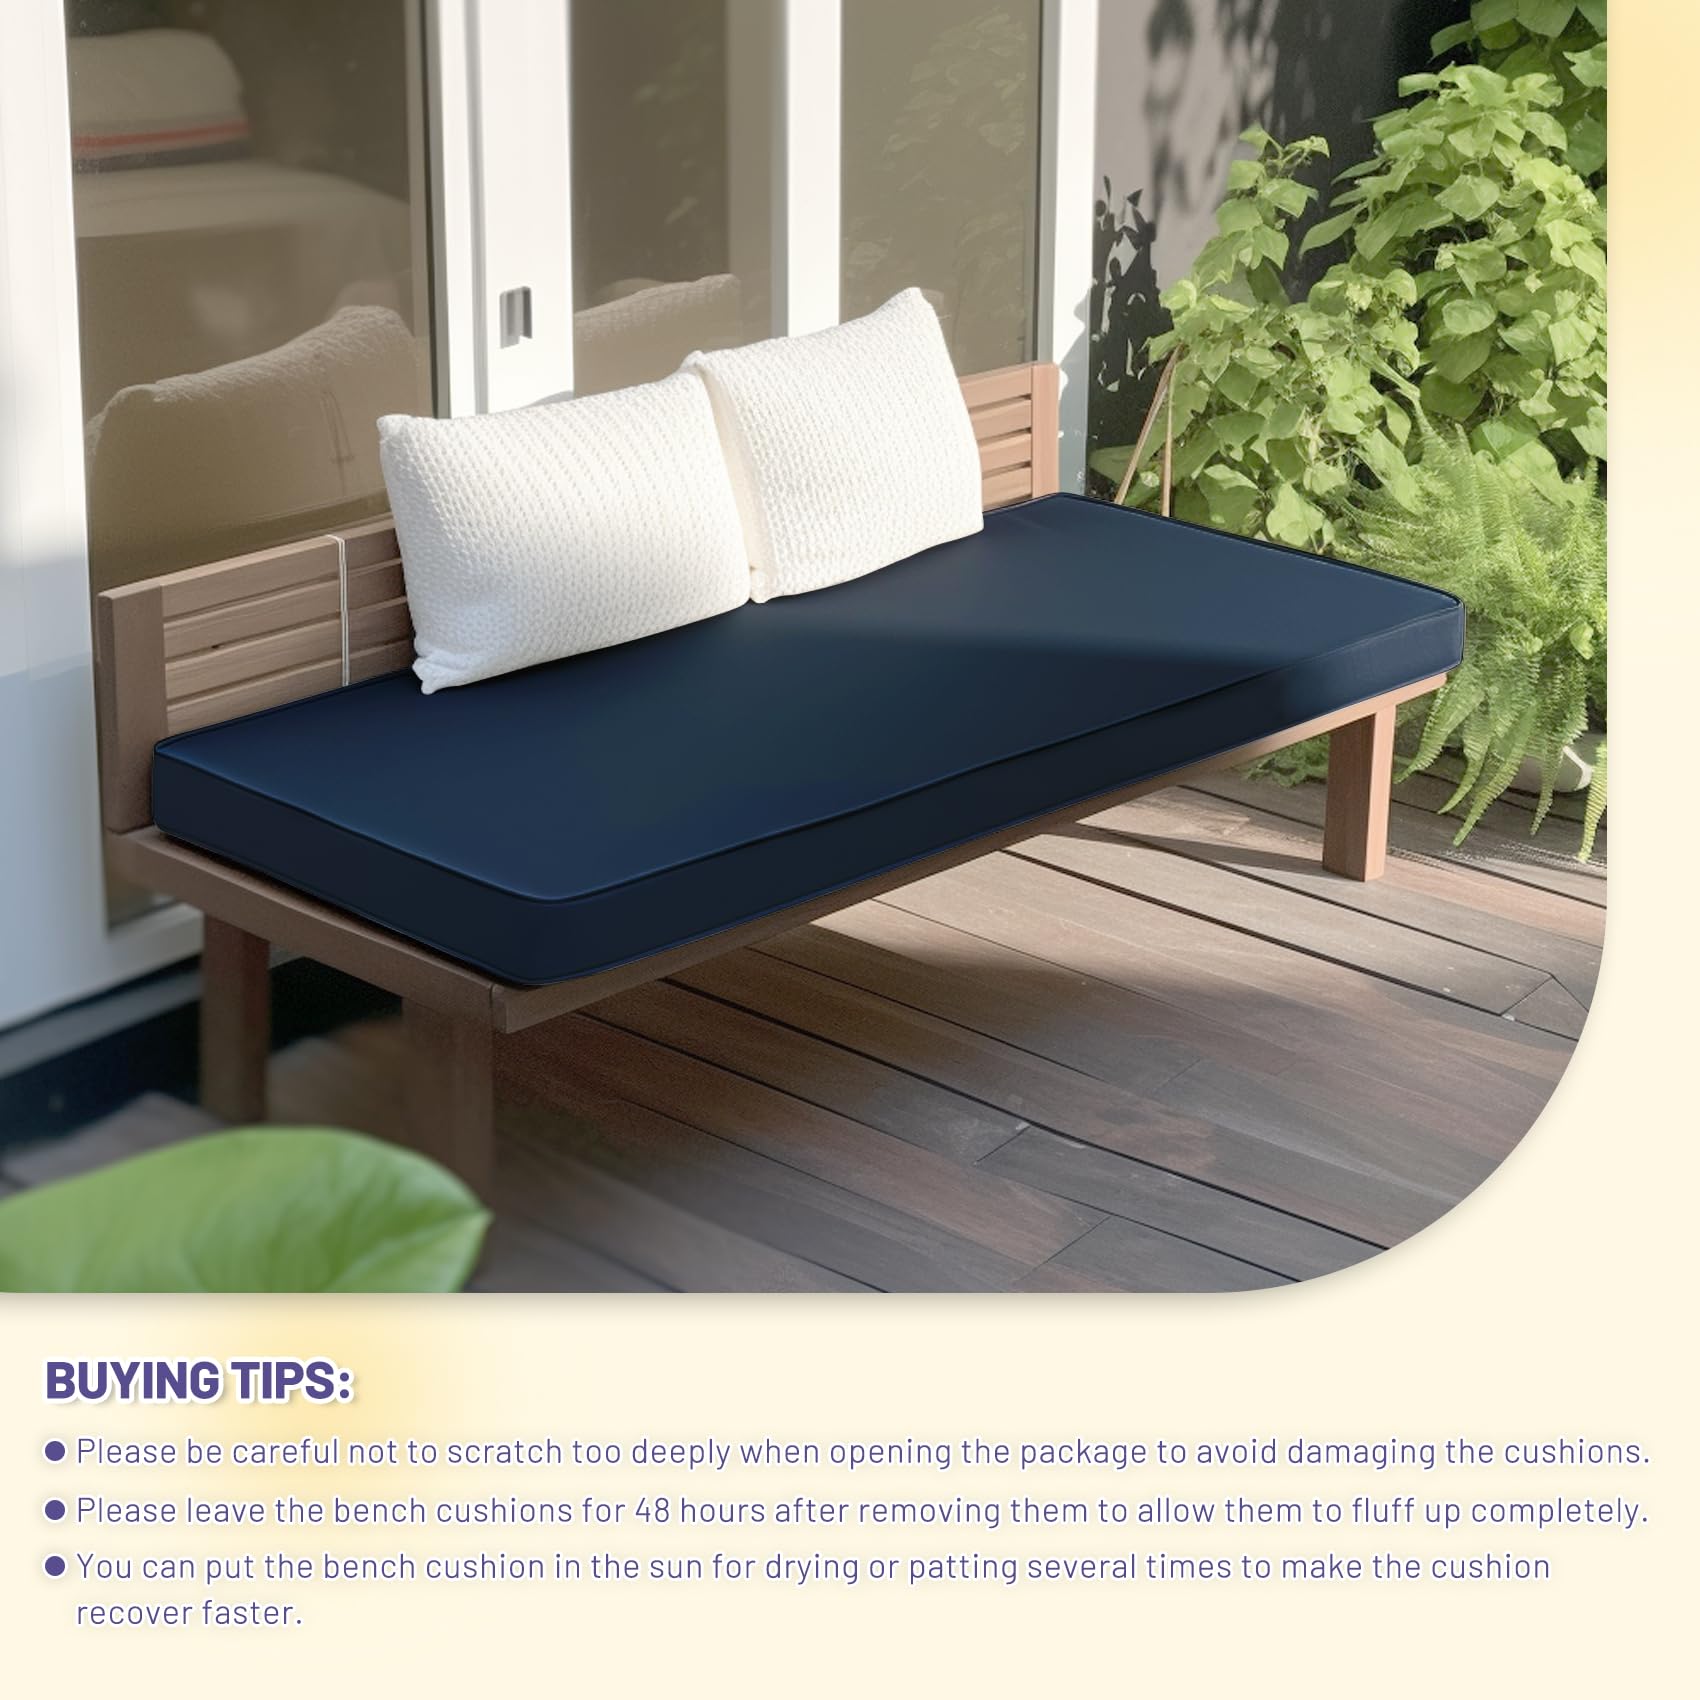 Sutteles Double Piping Bench Cushion,Resistant Bench Cushions for Outdoor Furniture,with Non-Slip Ties and Removable Cover,for Patio/Piano Bench Cushion (45x18x3, Nav Blue)